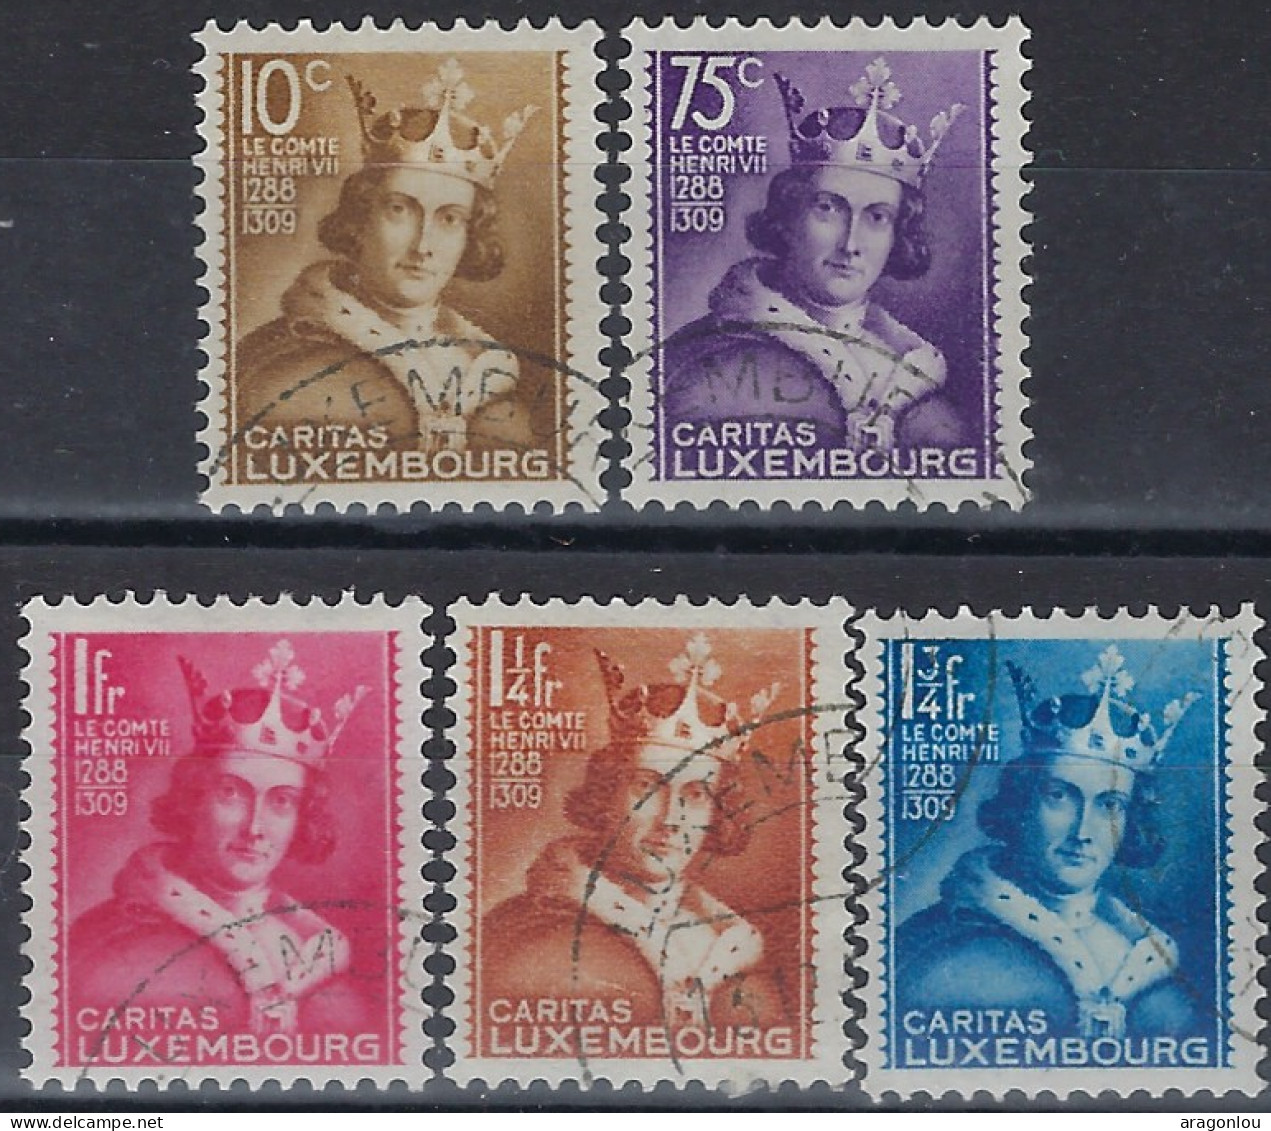 Luxembourg - Luxemburrg - Timbres  1933    Henri IV      Série   ° - Usados